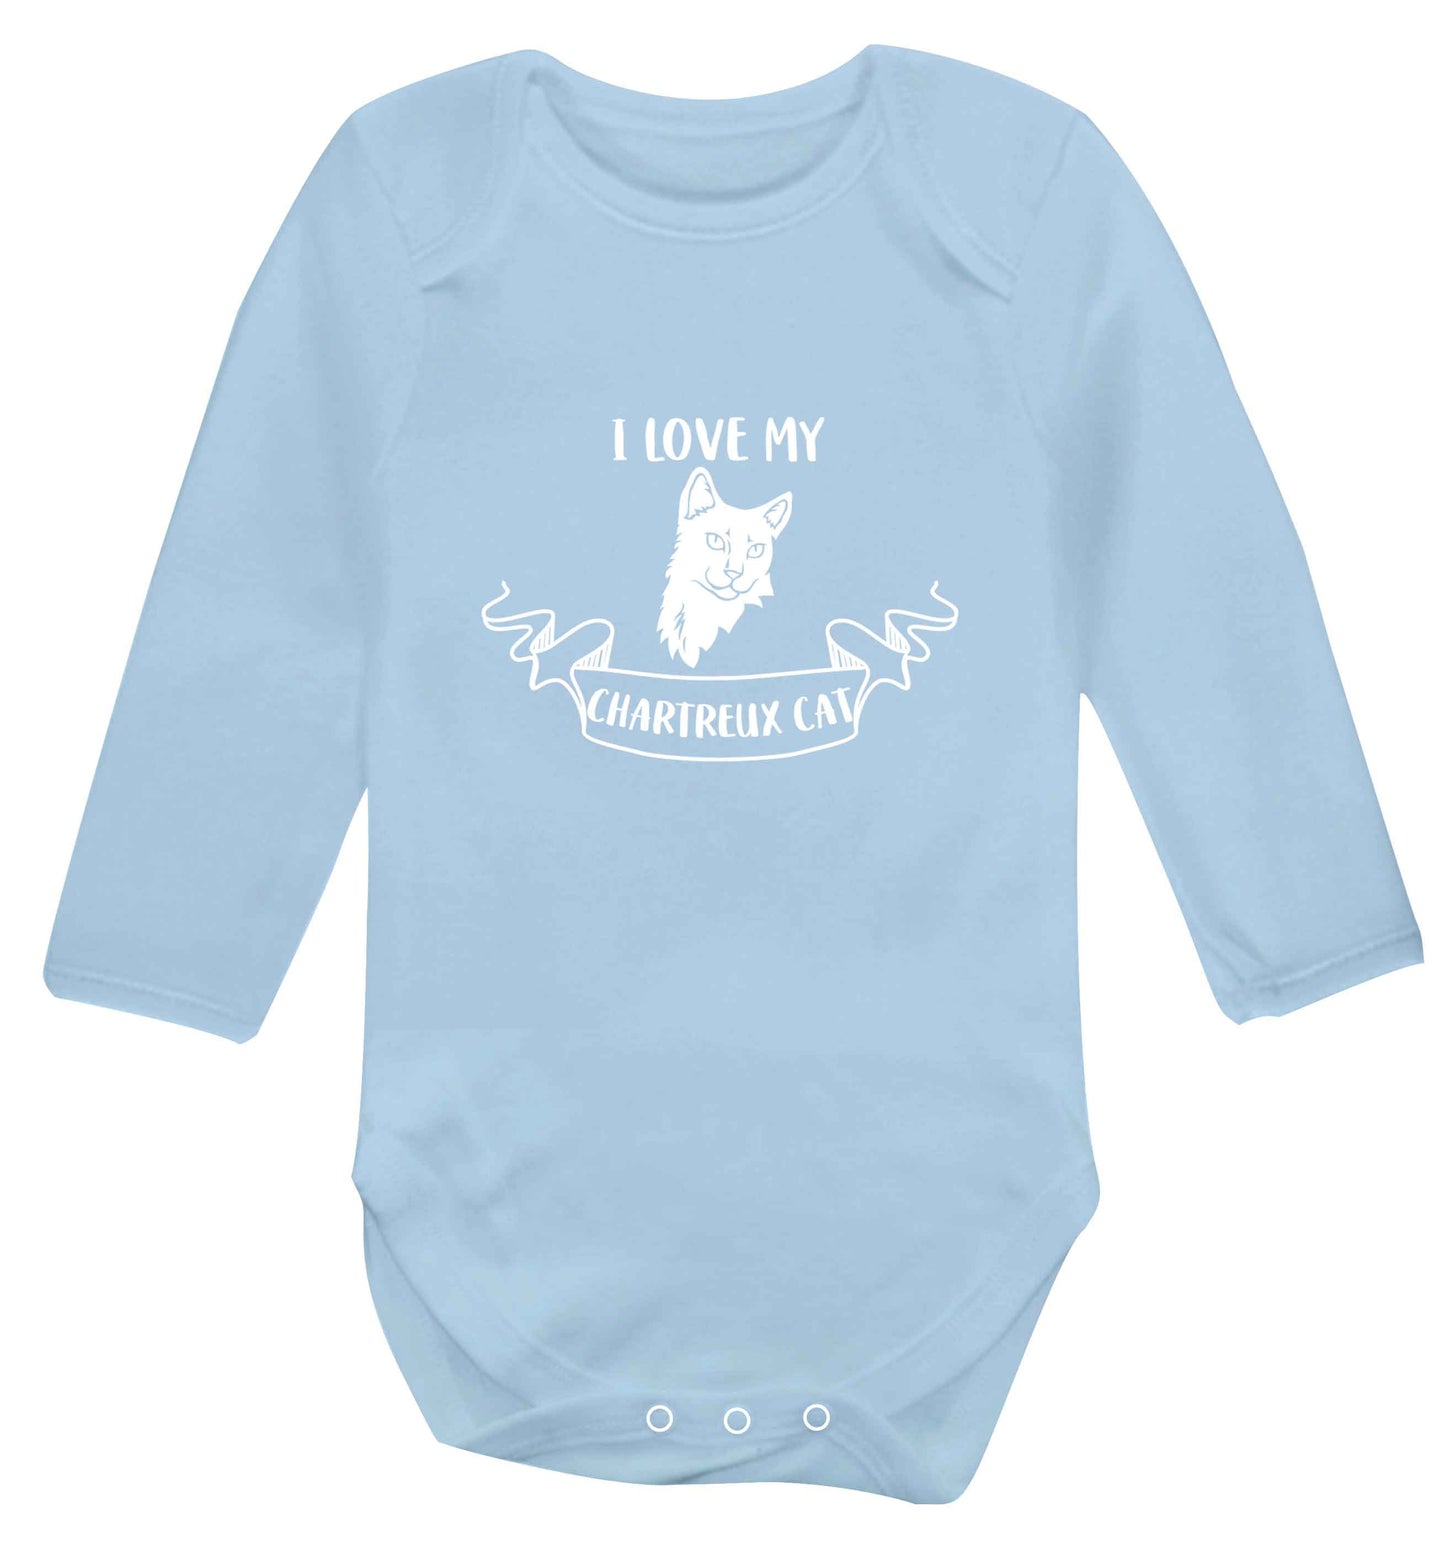 I love my chartreux cat baby vest long sleeved pale blue 6-12 months